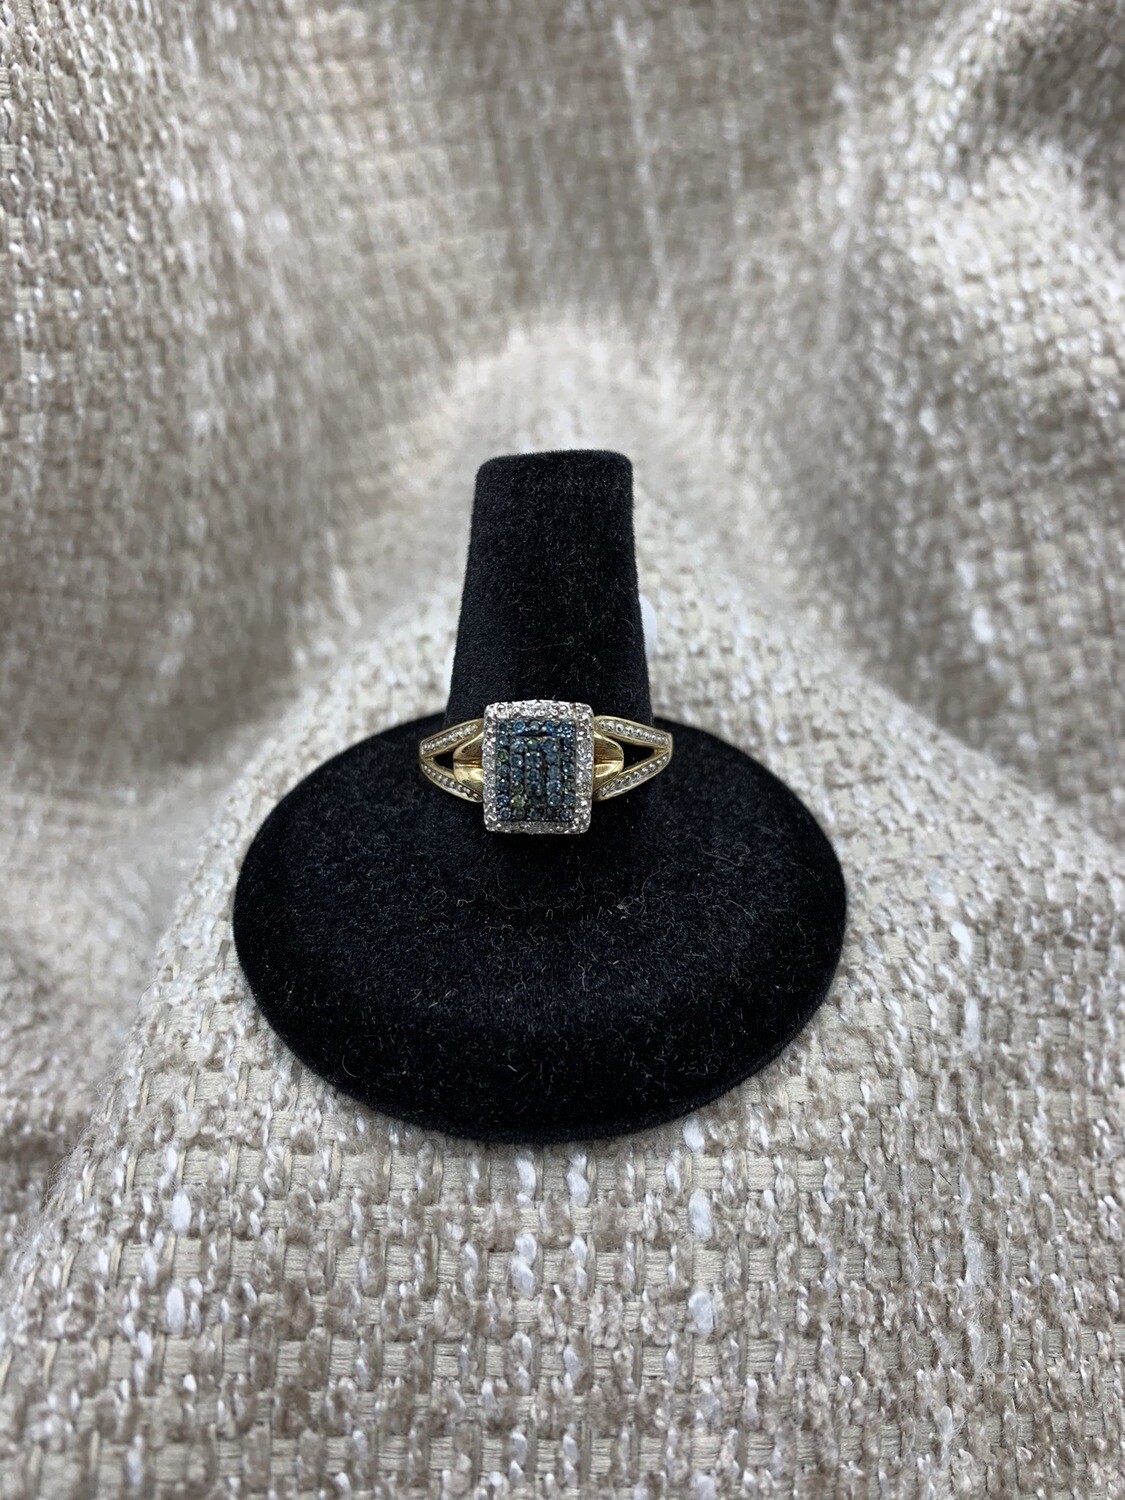 Blue And White Diamond Ring(16 Pts Total Weight) set in 10 Kt. White Gold